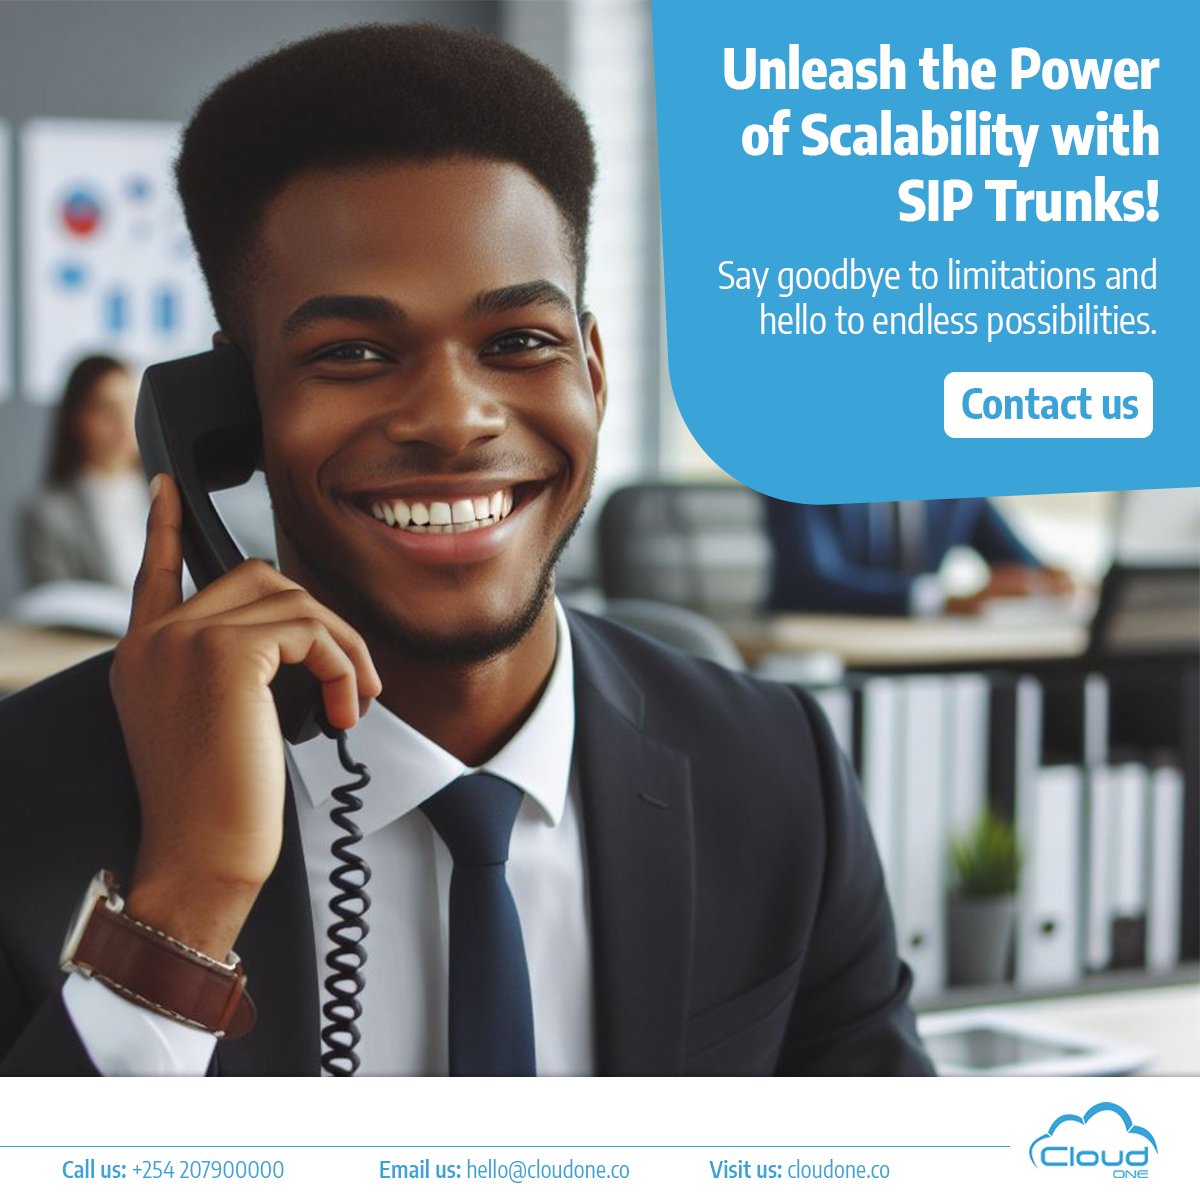 Use Cloud One's Business SIP Trunk subscription service to help scale your business, and get access to: 

1. No line rental charge,
2. Preloaded talk time equal to amount for business SIP trunk subscriptions,
3. Unexpired unused talk time, and much more..

#cloudone #siptrunk